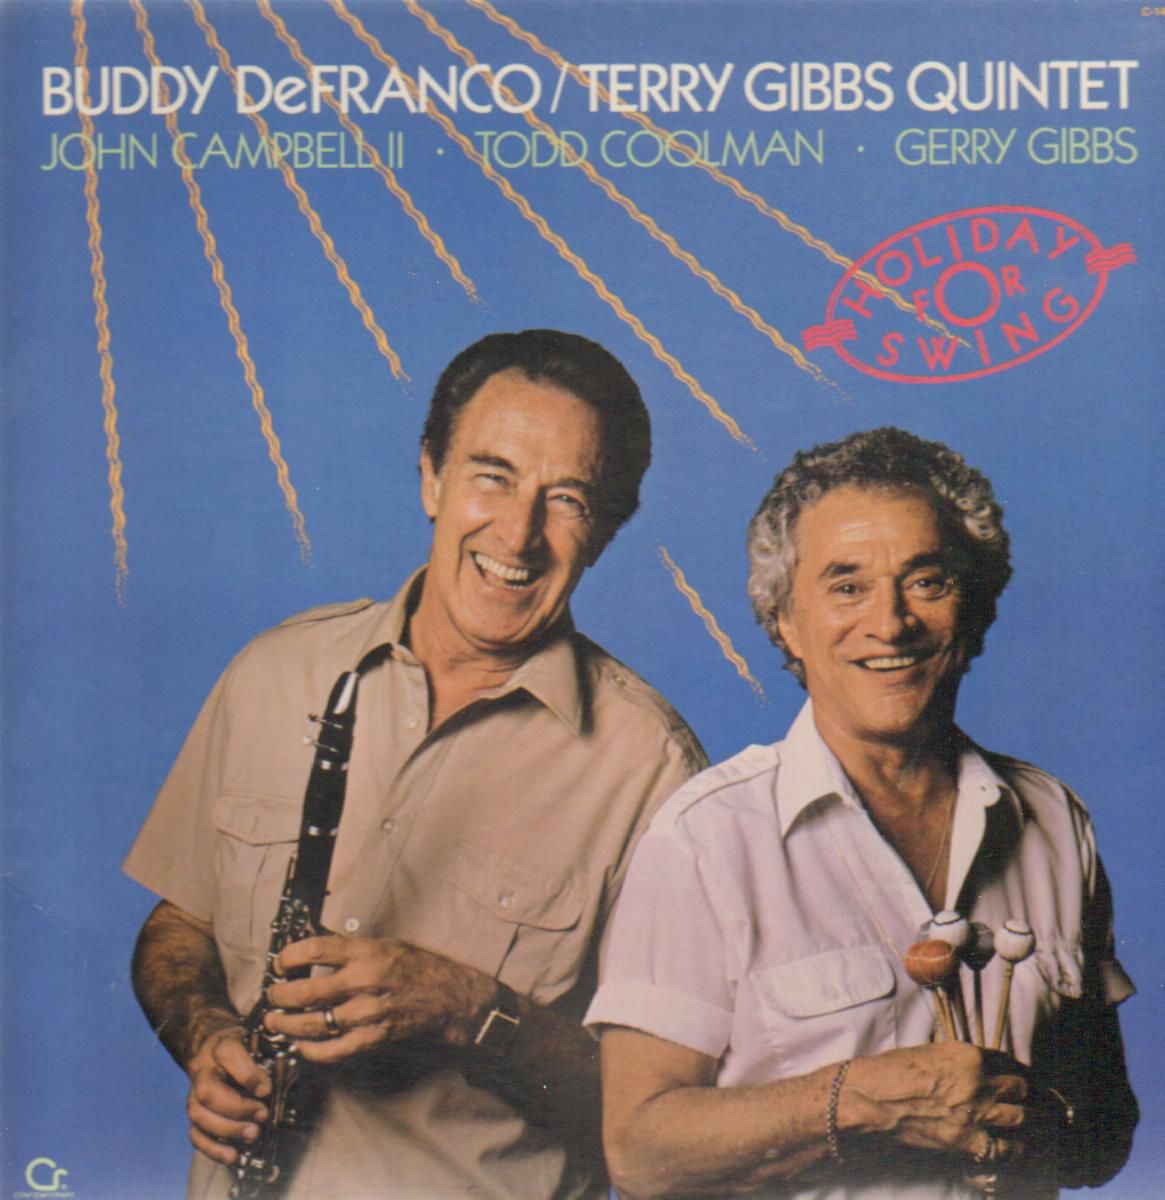 BUDDY DEFRANCO - Buddy De Franco / Terry Gibbs Quintet ‎: Holiday For Swing cover 